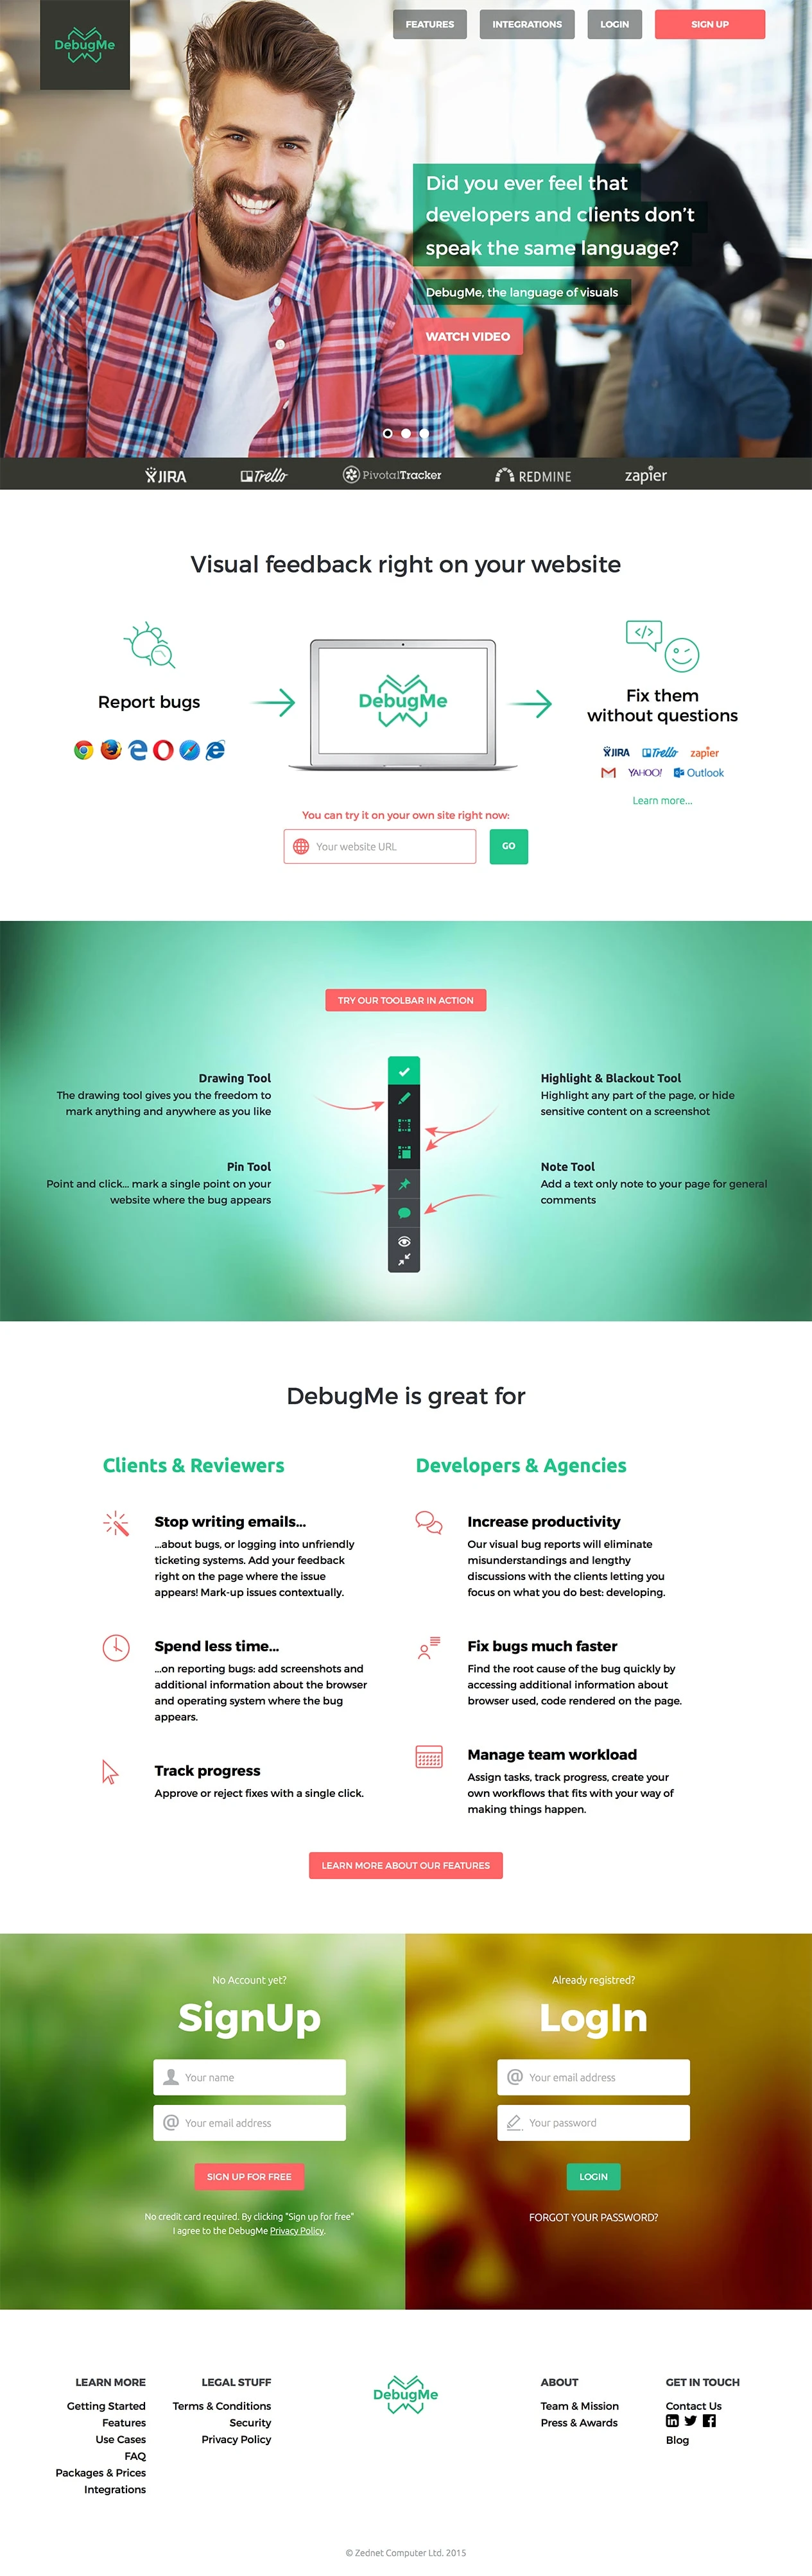 DebugMe Landing Page Example: DebugMe is a simple bug tracker for web designers and developers. Bug tracking, browser testing and giving visual feedback was never easier. Try it for FREE